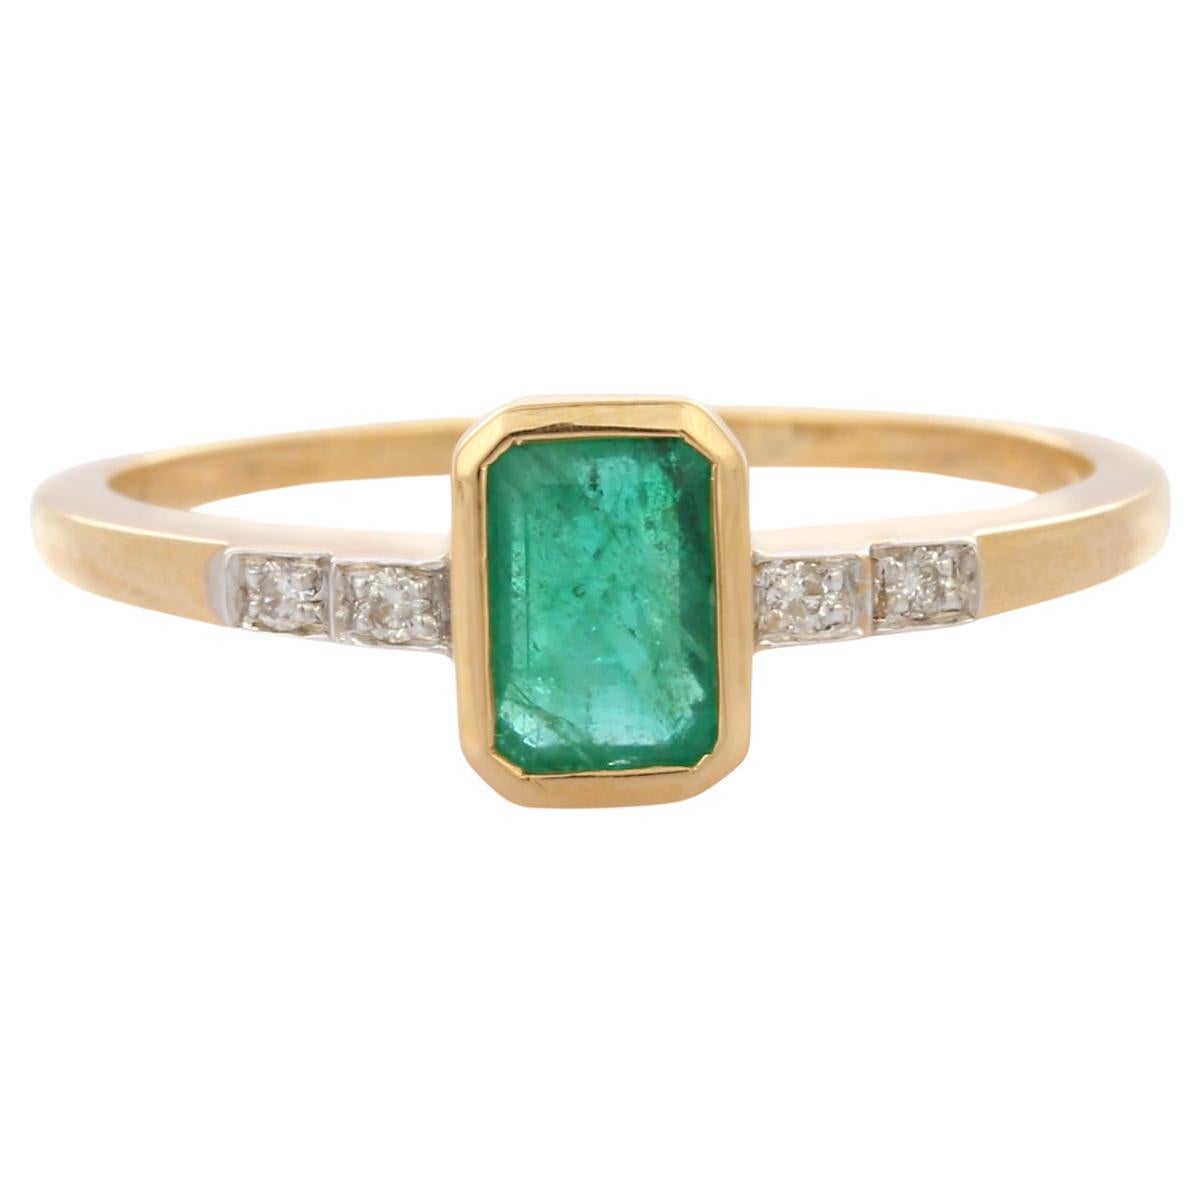 For Sale:  18K Yellow Gold Octagon Cut Emerald and Diamond Stackable Ring, Gift for Her